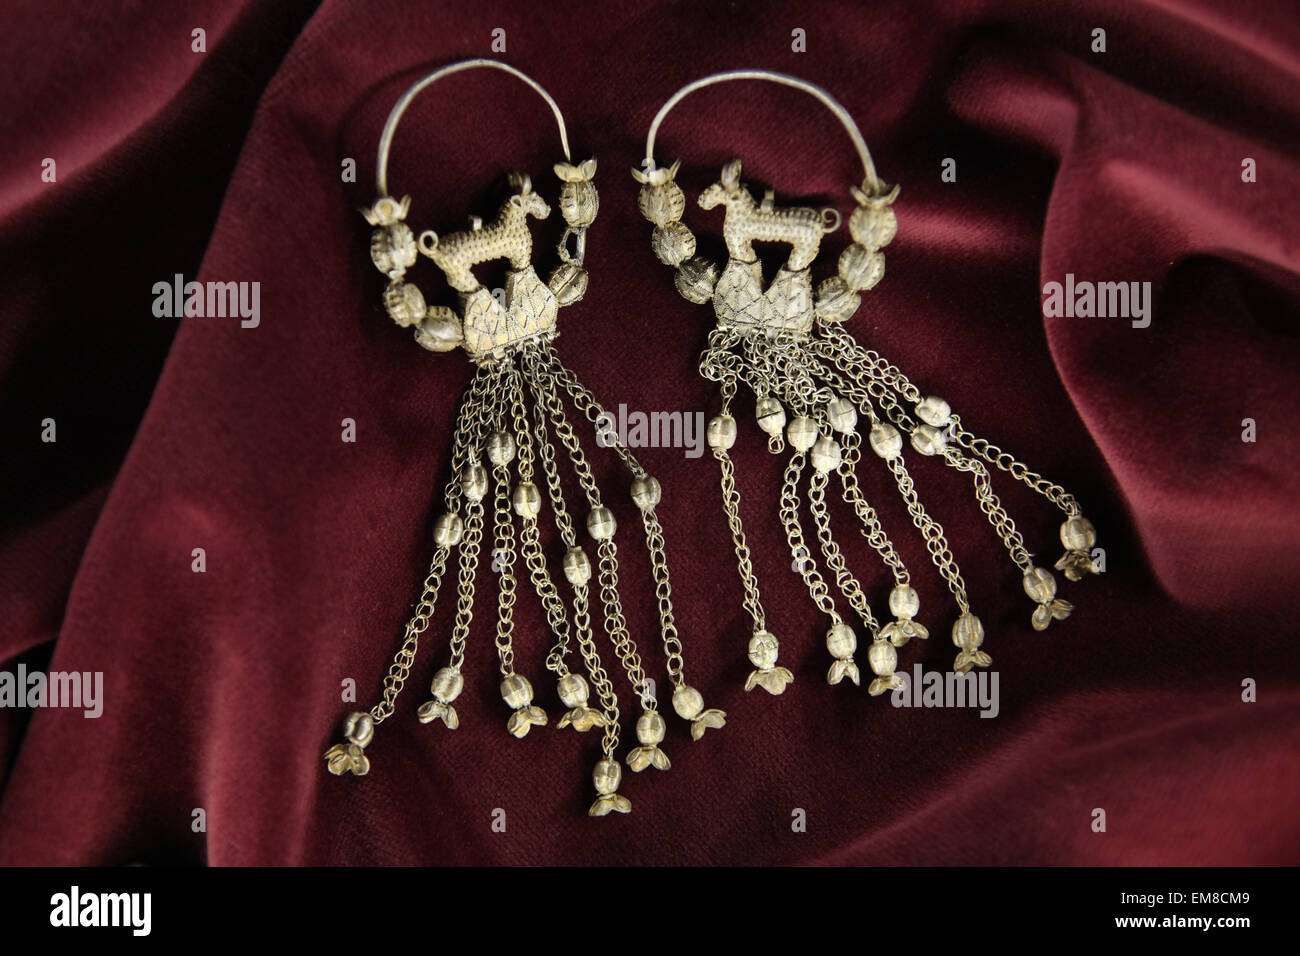 Prague, Czech Republic. 16th April 2015. Pair of Great Moravian silver earrings with long chain pendants and decorated with granulation from the first half of the 10th century from the Princess grave from Stara Kourim displayed at the exhibition 'Great Moravia and the Beginnings of Christianity' in Prague, Czech Republic. The exhibition presenting medieval treasures and original artefacts of the first Slavic state runs in Prague Castle till June 28, 2015. Stock Photo